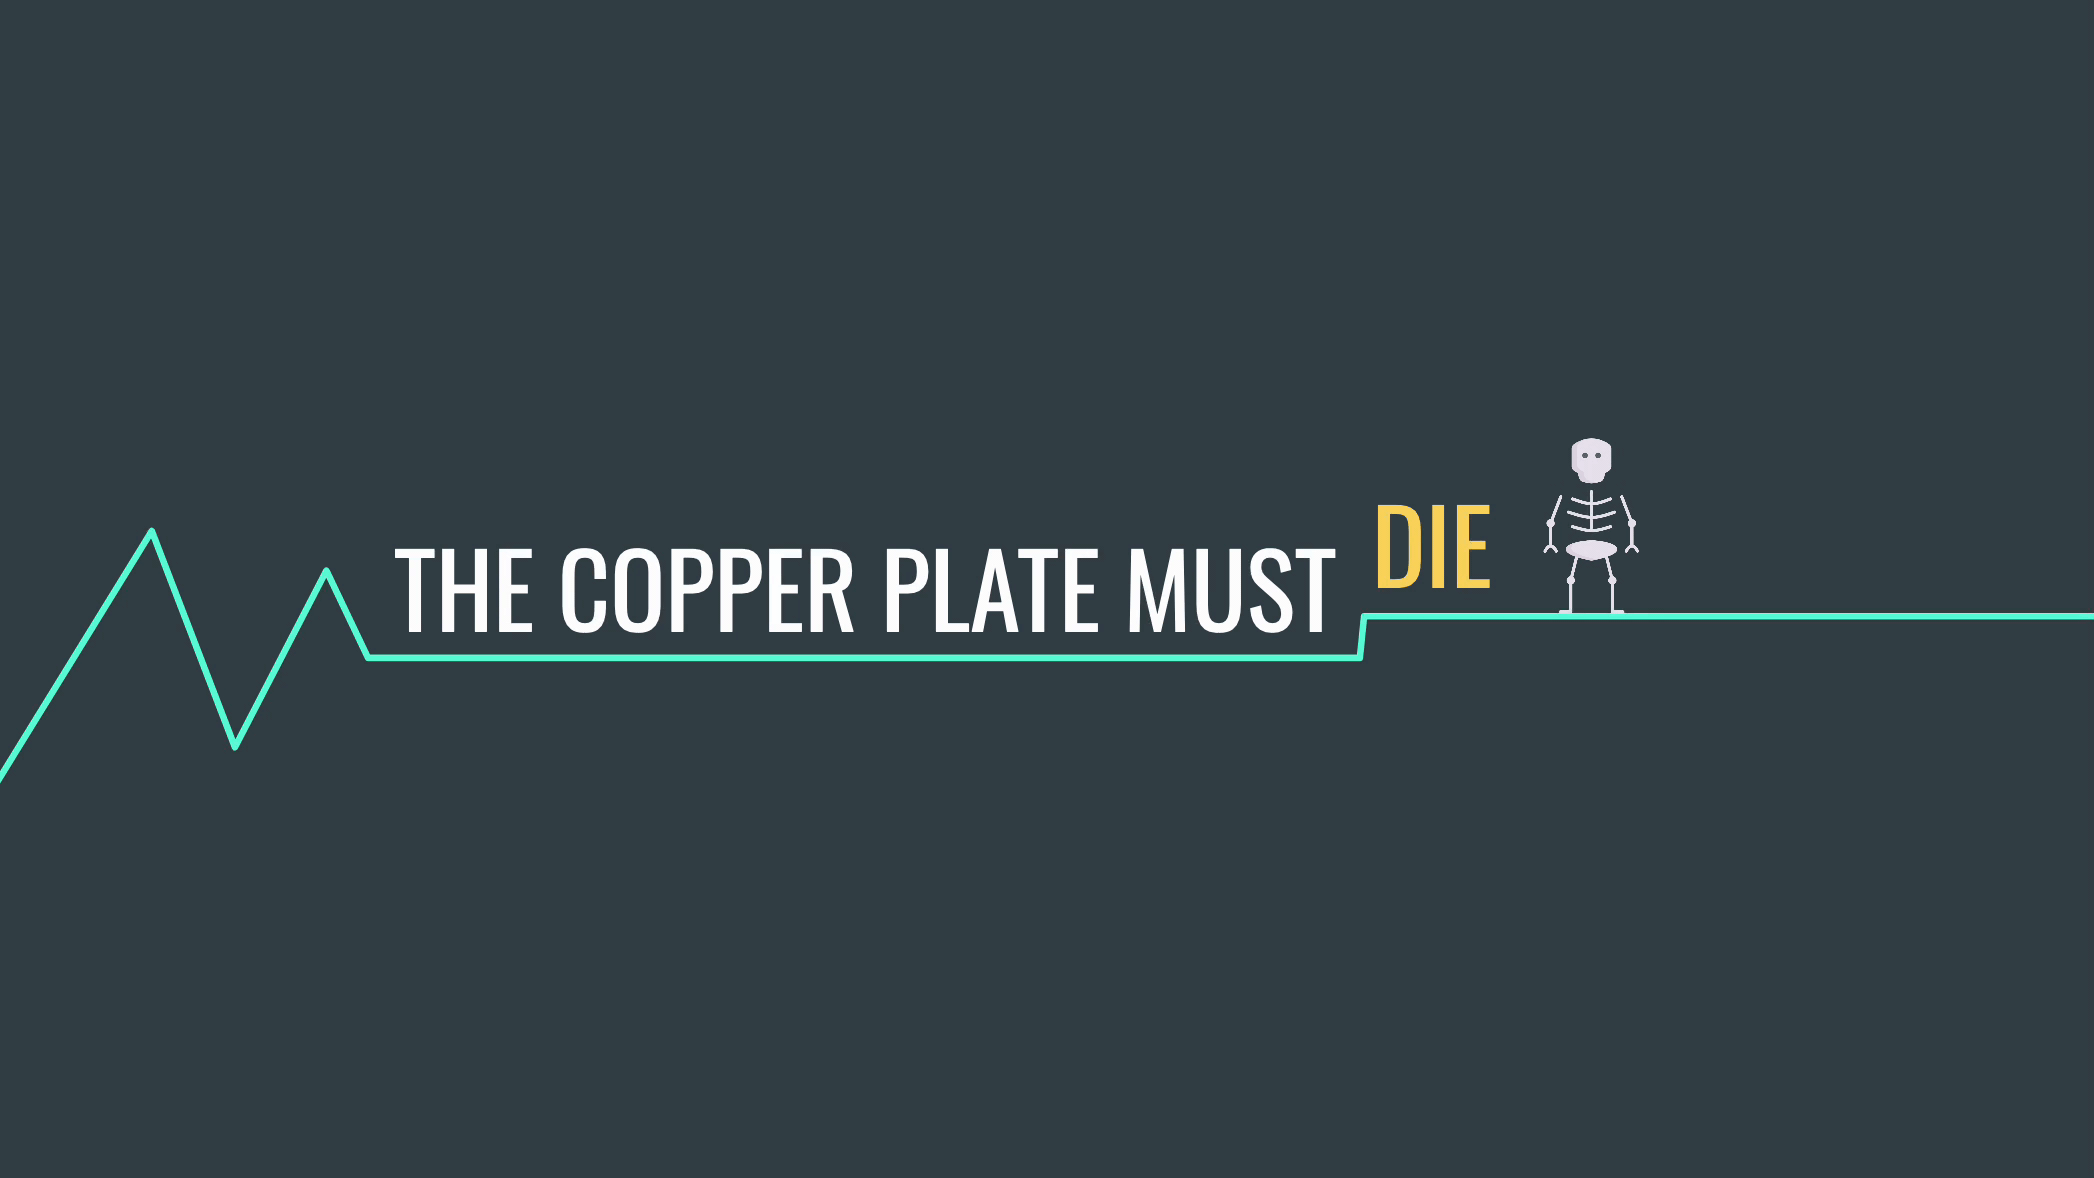 The Copper Plate Must Die 💀